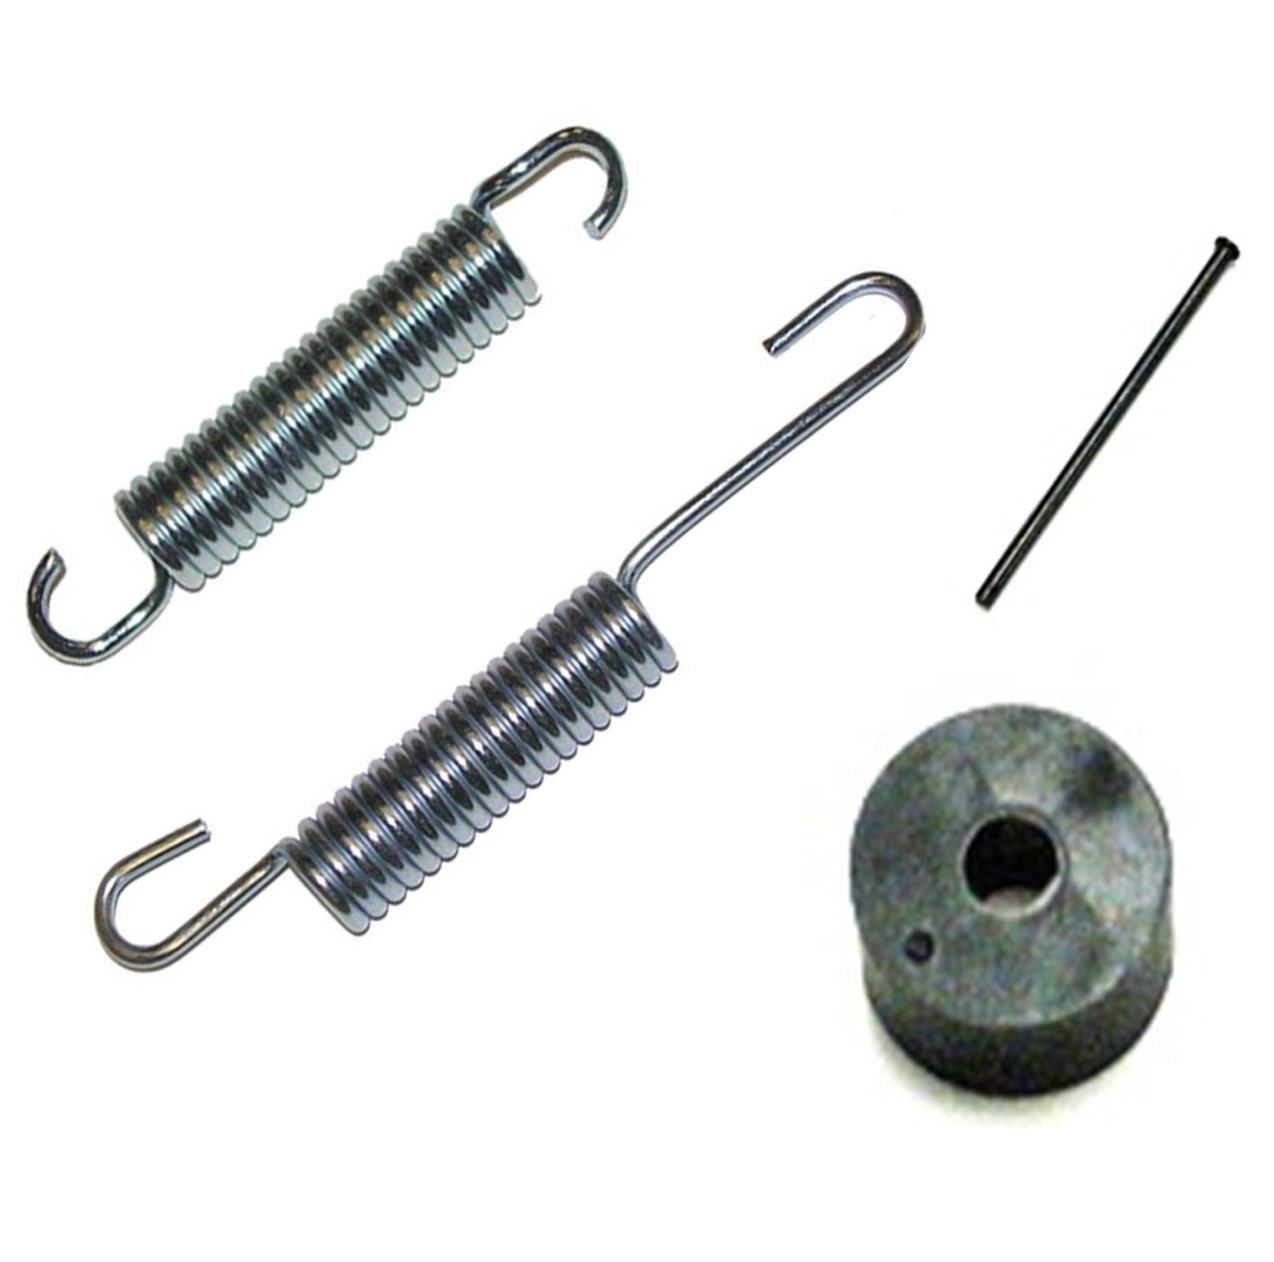 Springs and Parts